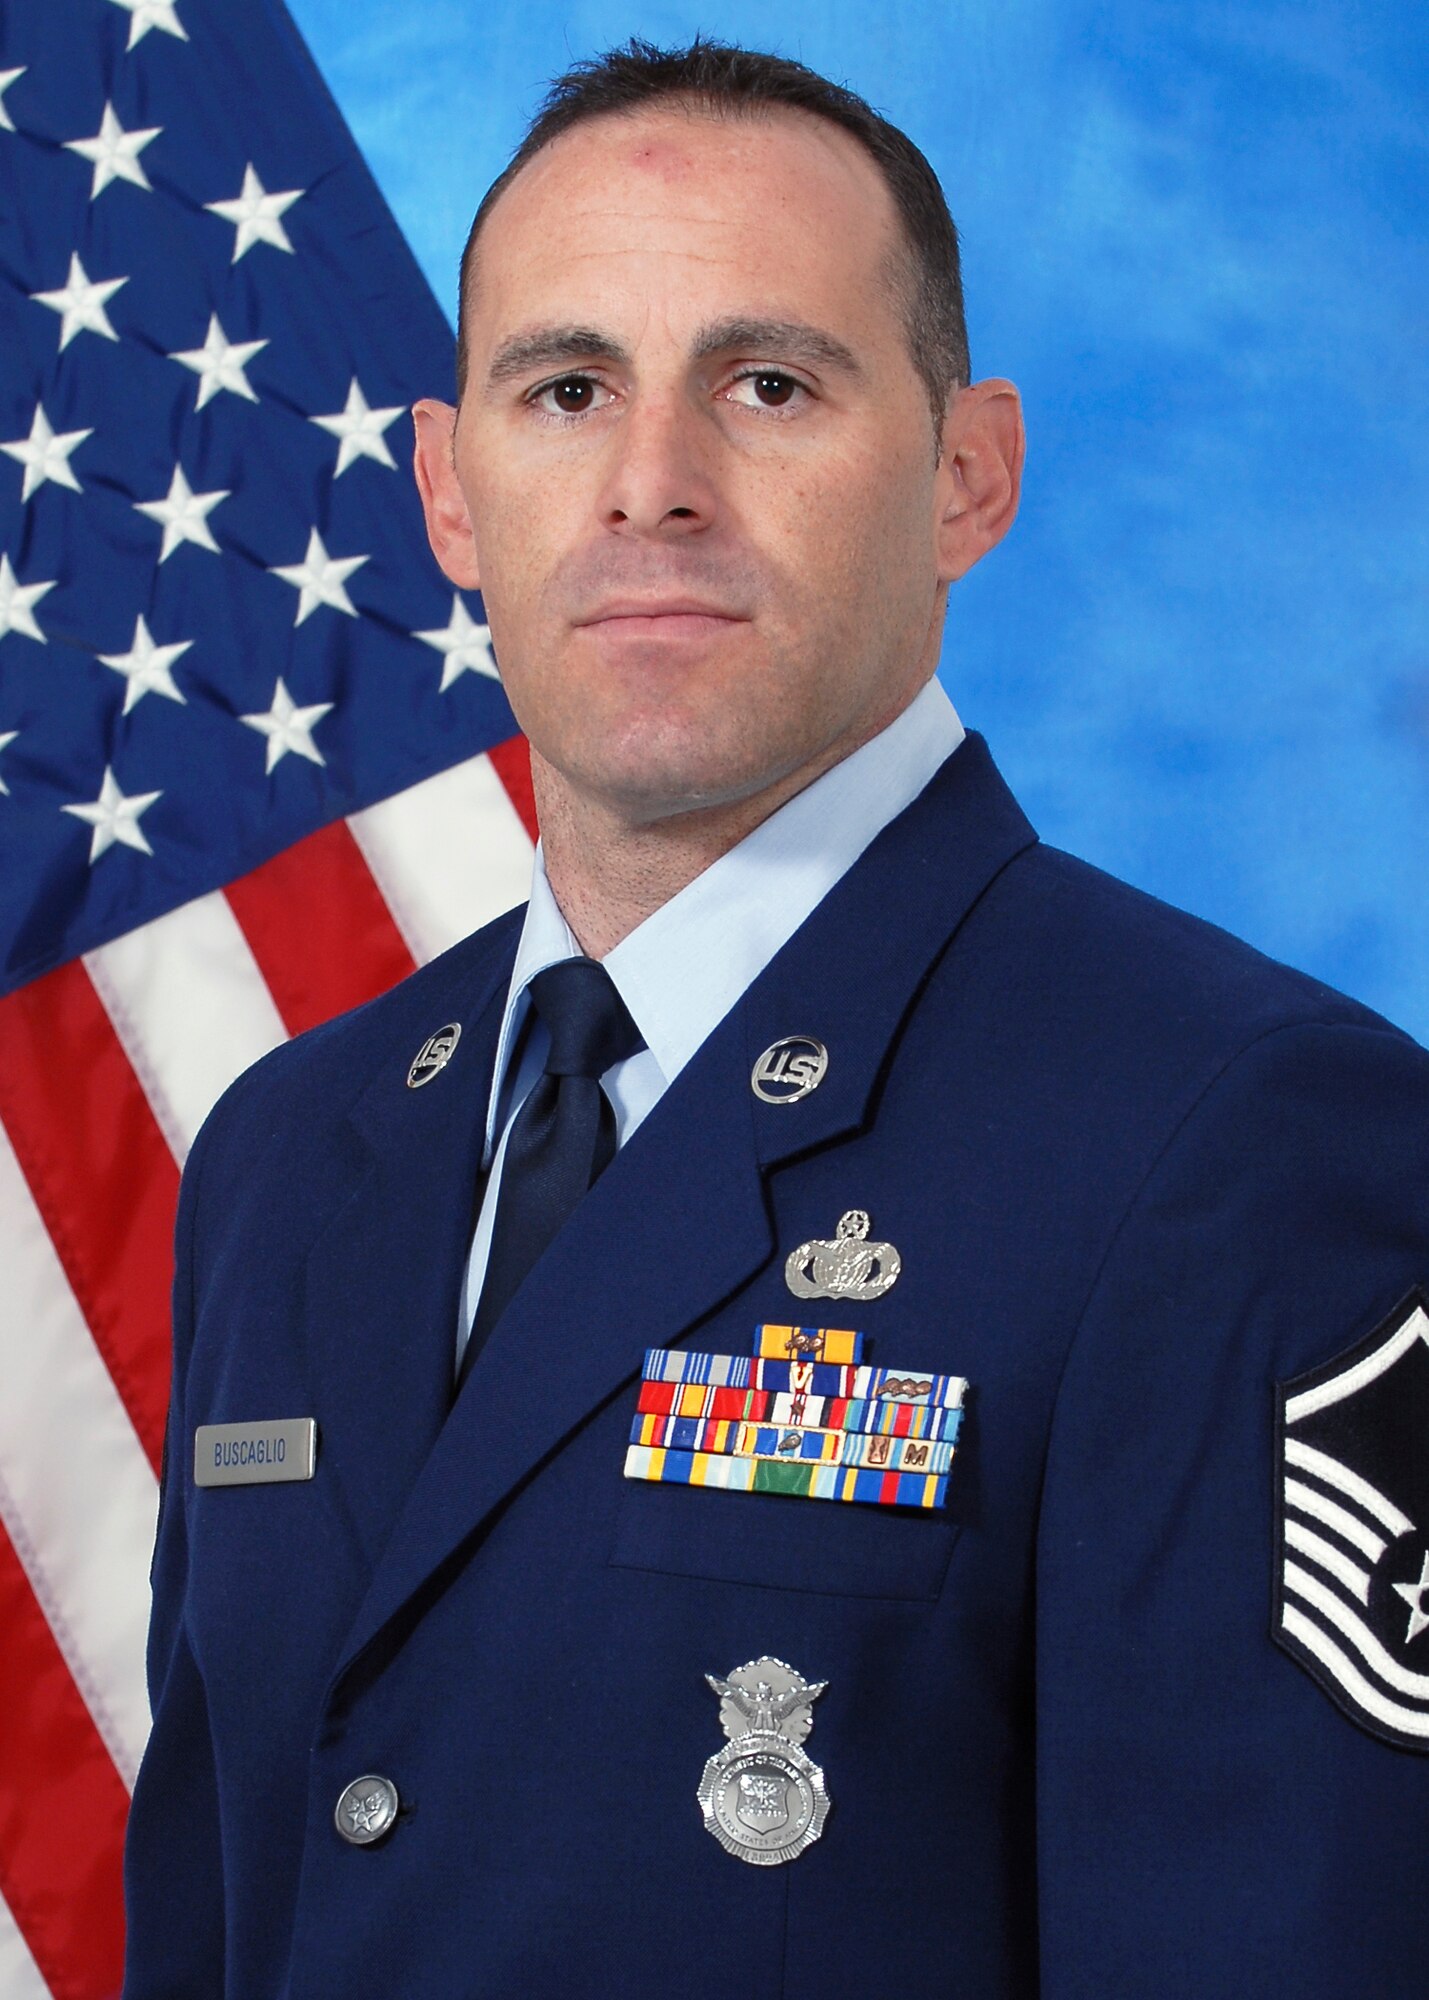 Master Sgt. Christopher Buscaglio (U.S. Air Force Photo/Staff Sgt Denise willhite)
